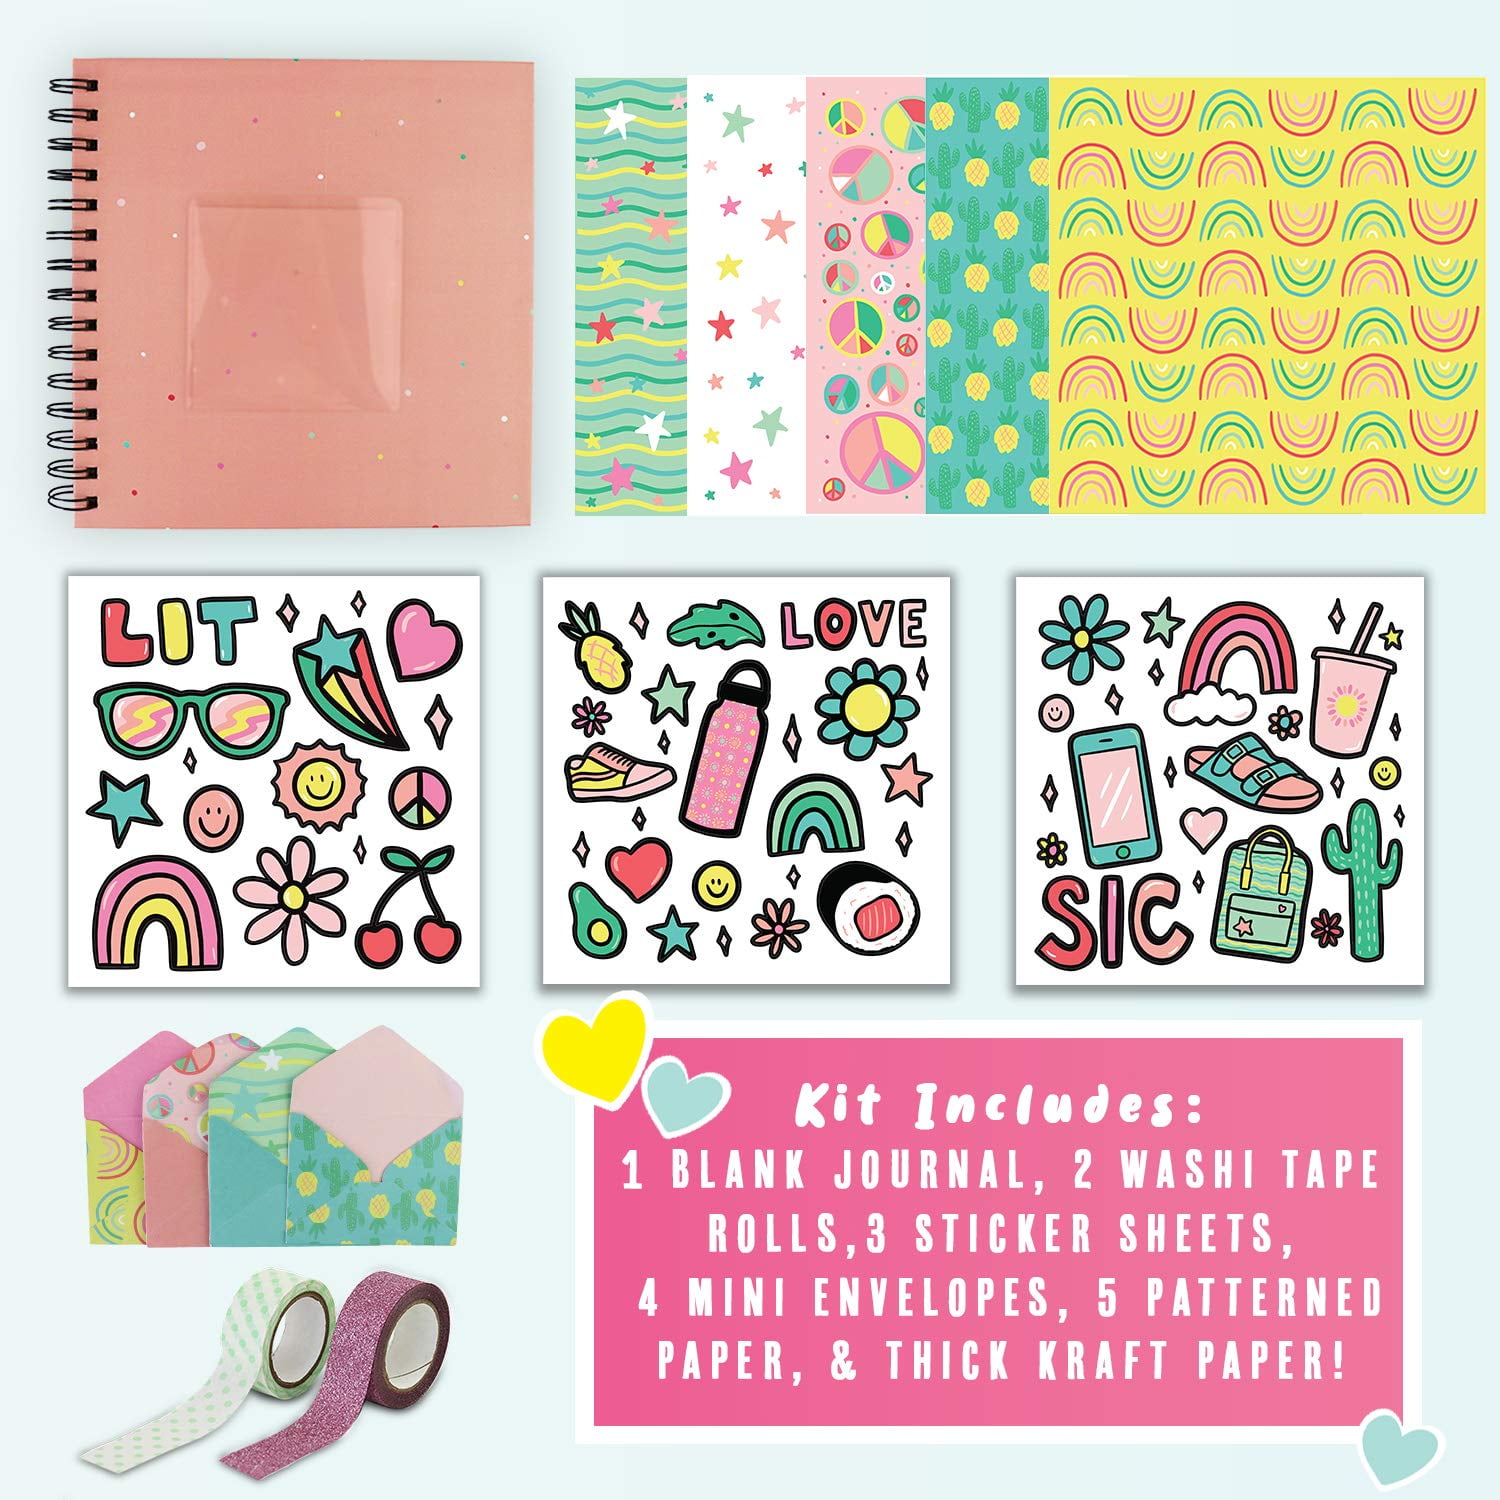 Design Your Own Pink Scrapbook by Doodle Hog, Kids Scrapbook Kit, Gifts for 10 Year Old Girl, Personalize & Decorate Your DIY Scrapbook with Washi